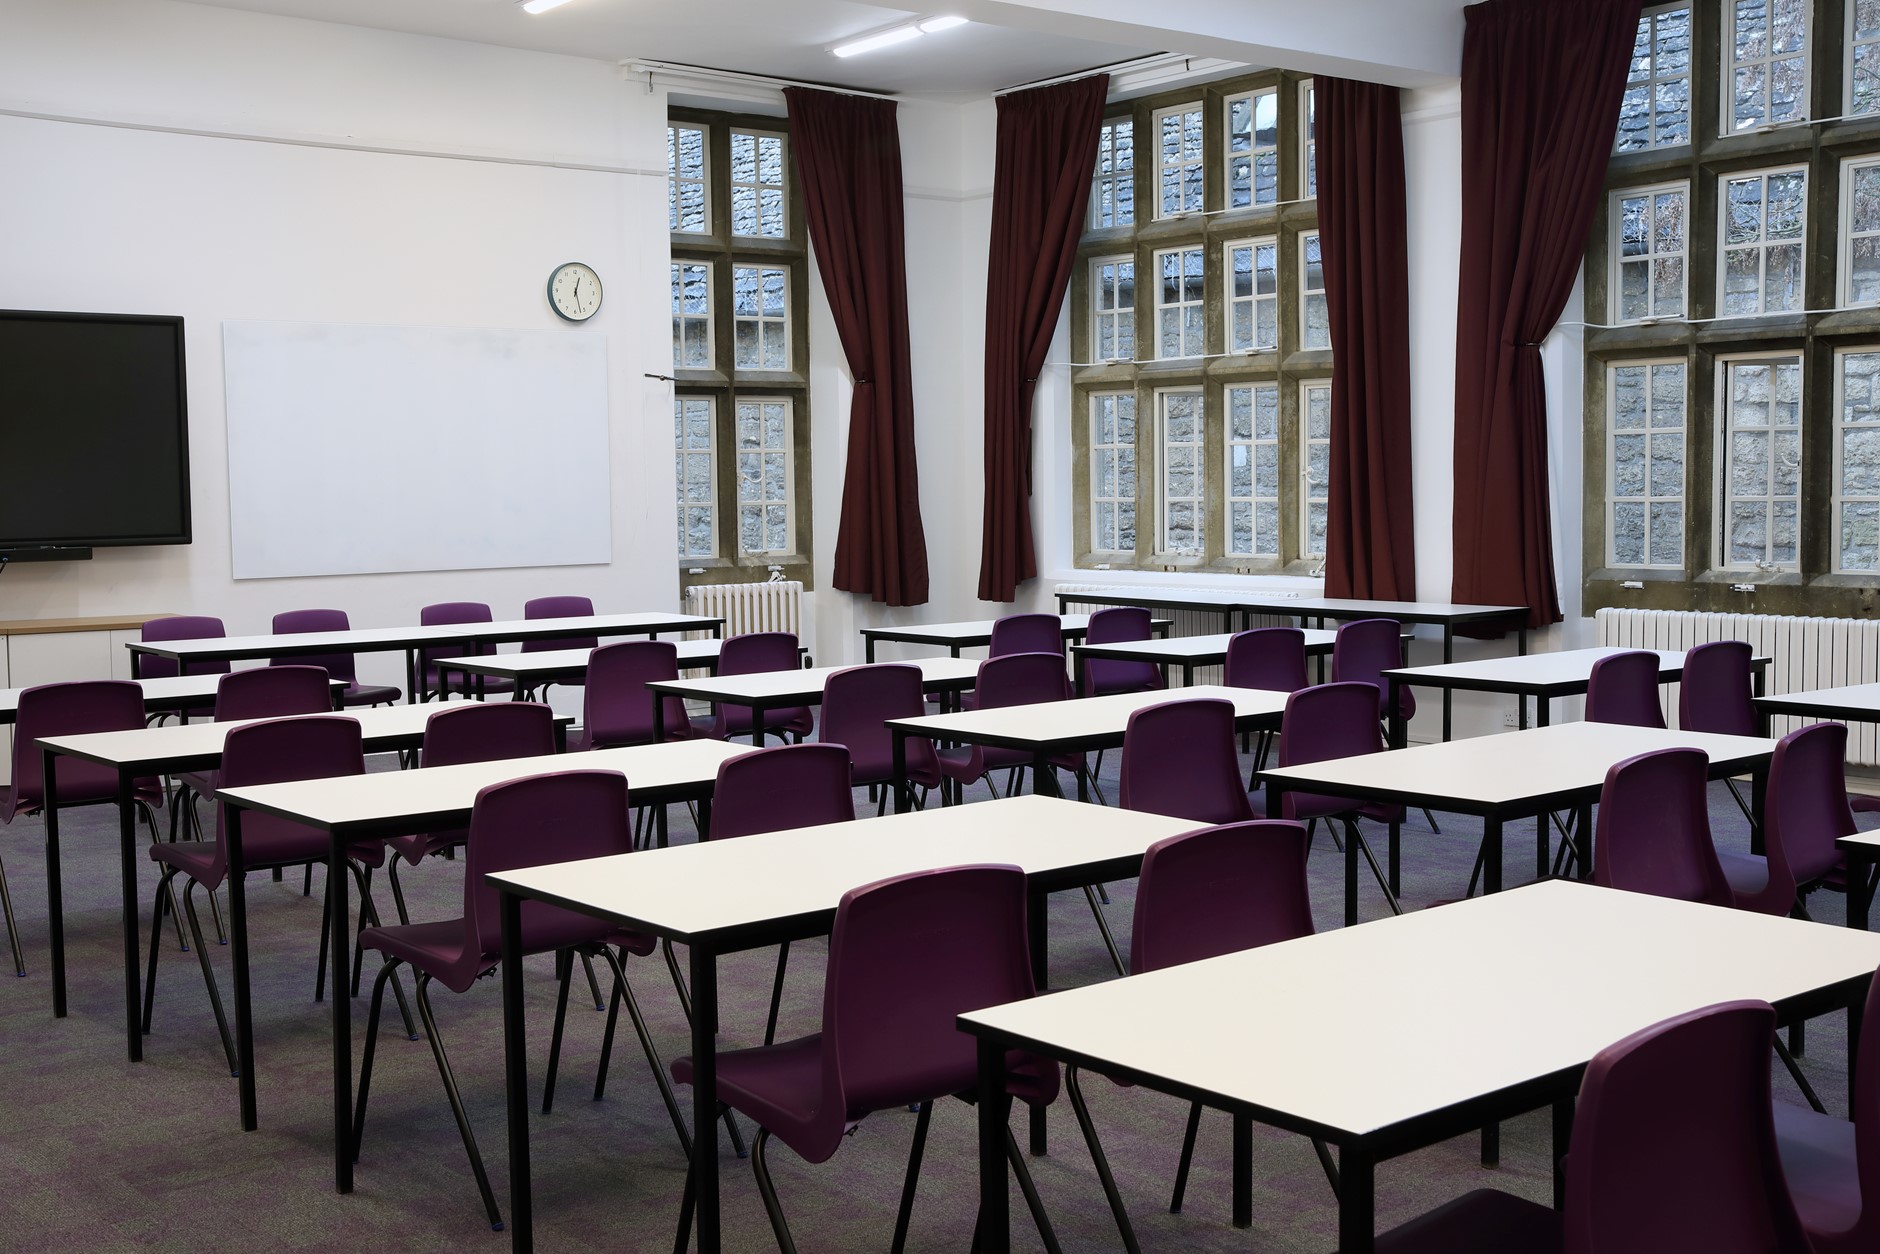 Christopher Cox room - a large room with windows all around filled with desks and 2 purple seats per desk